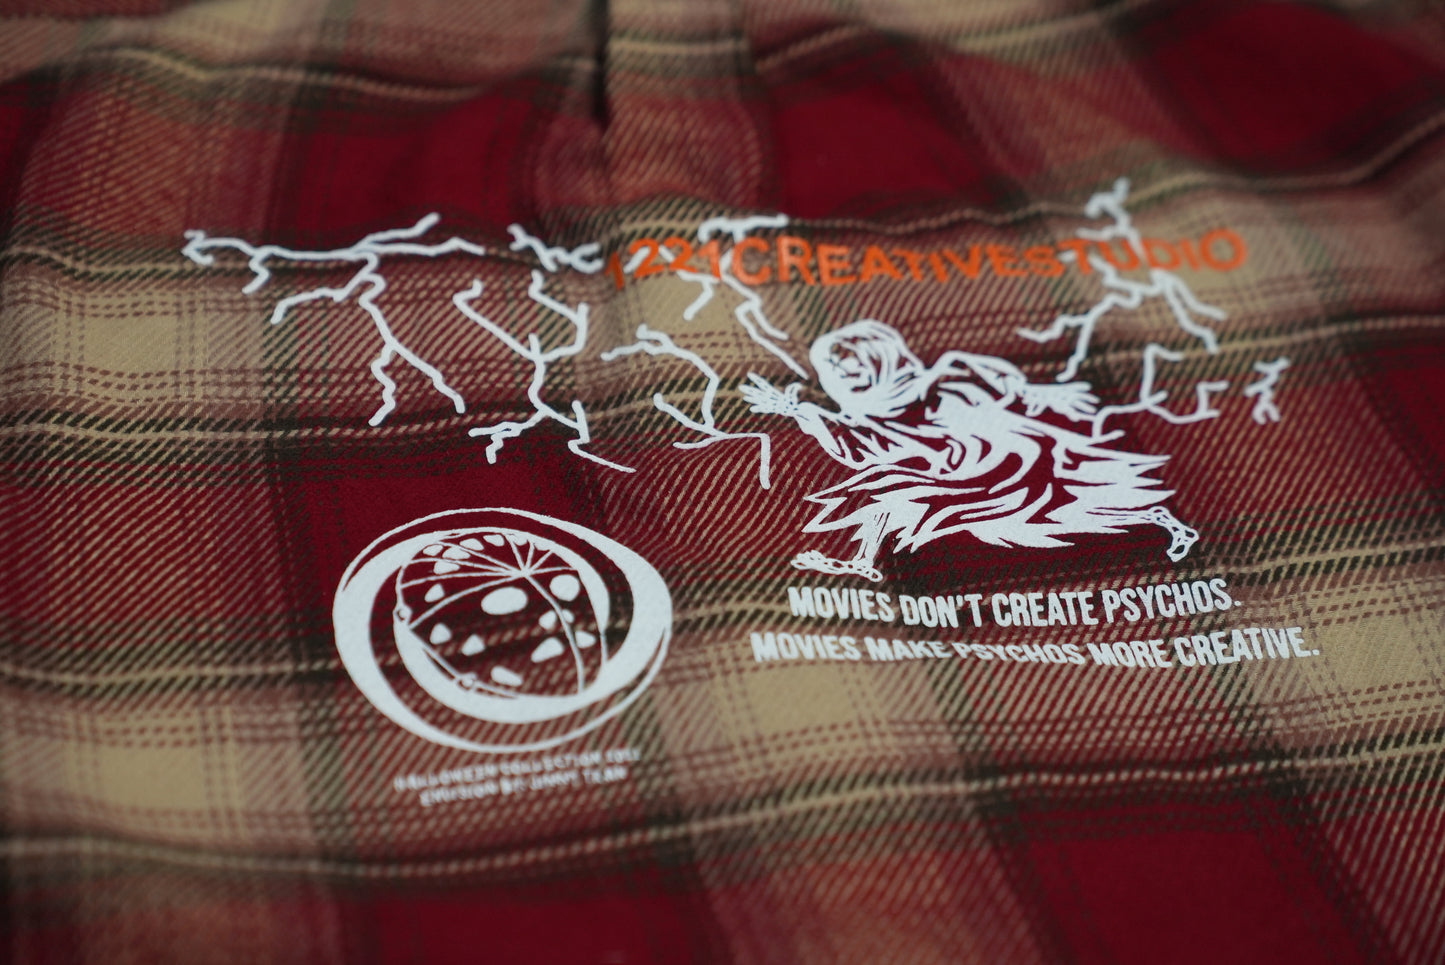 1221 movies don't create psychos - Flannel (Heavyweight w/deep pockets) - Red or Green